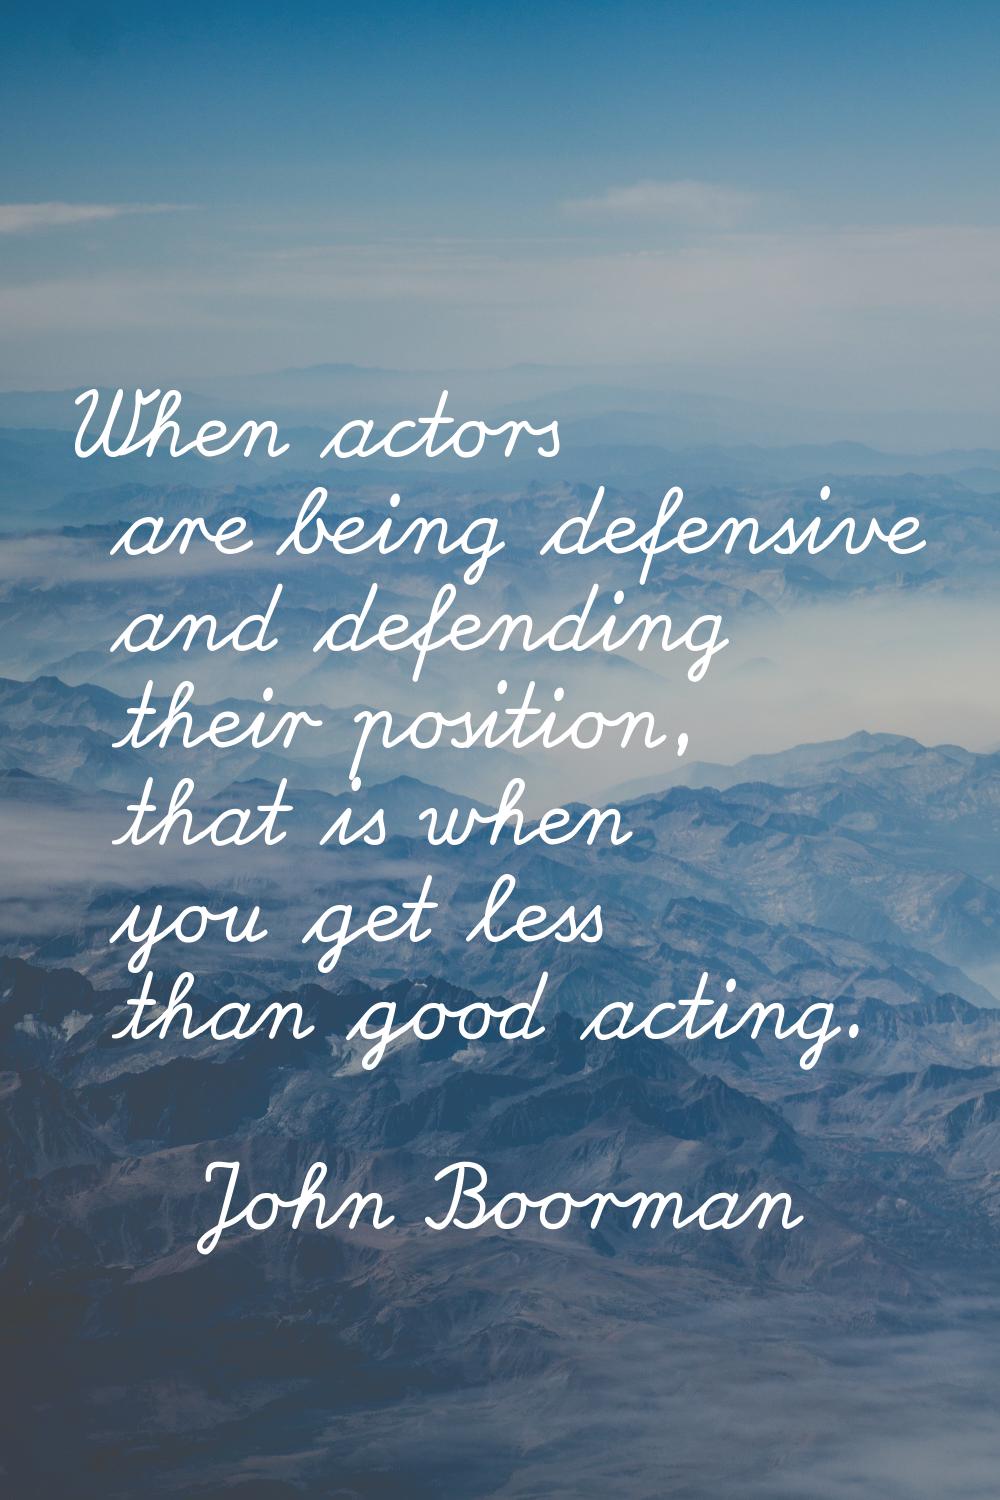 When actors are being defensive and defending their position, that is when you get less than good a